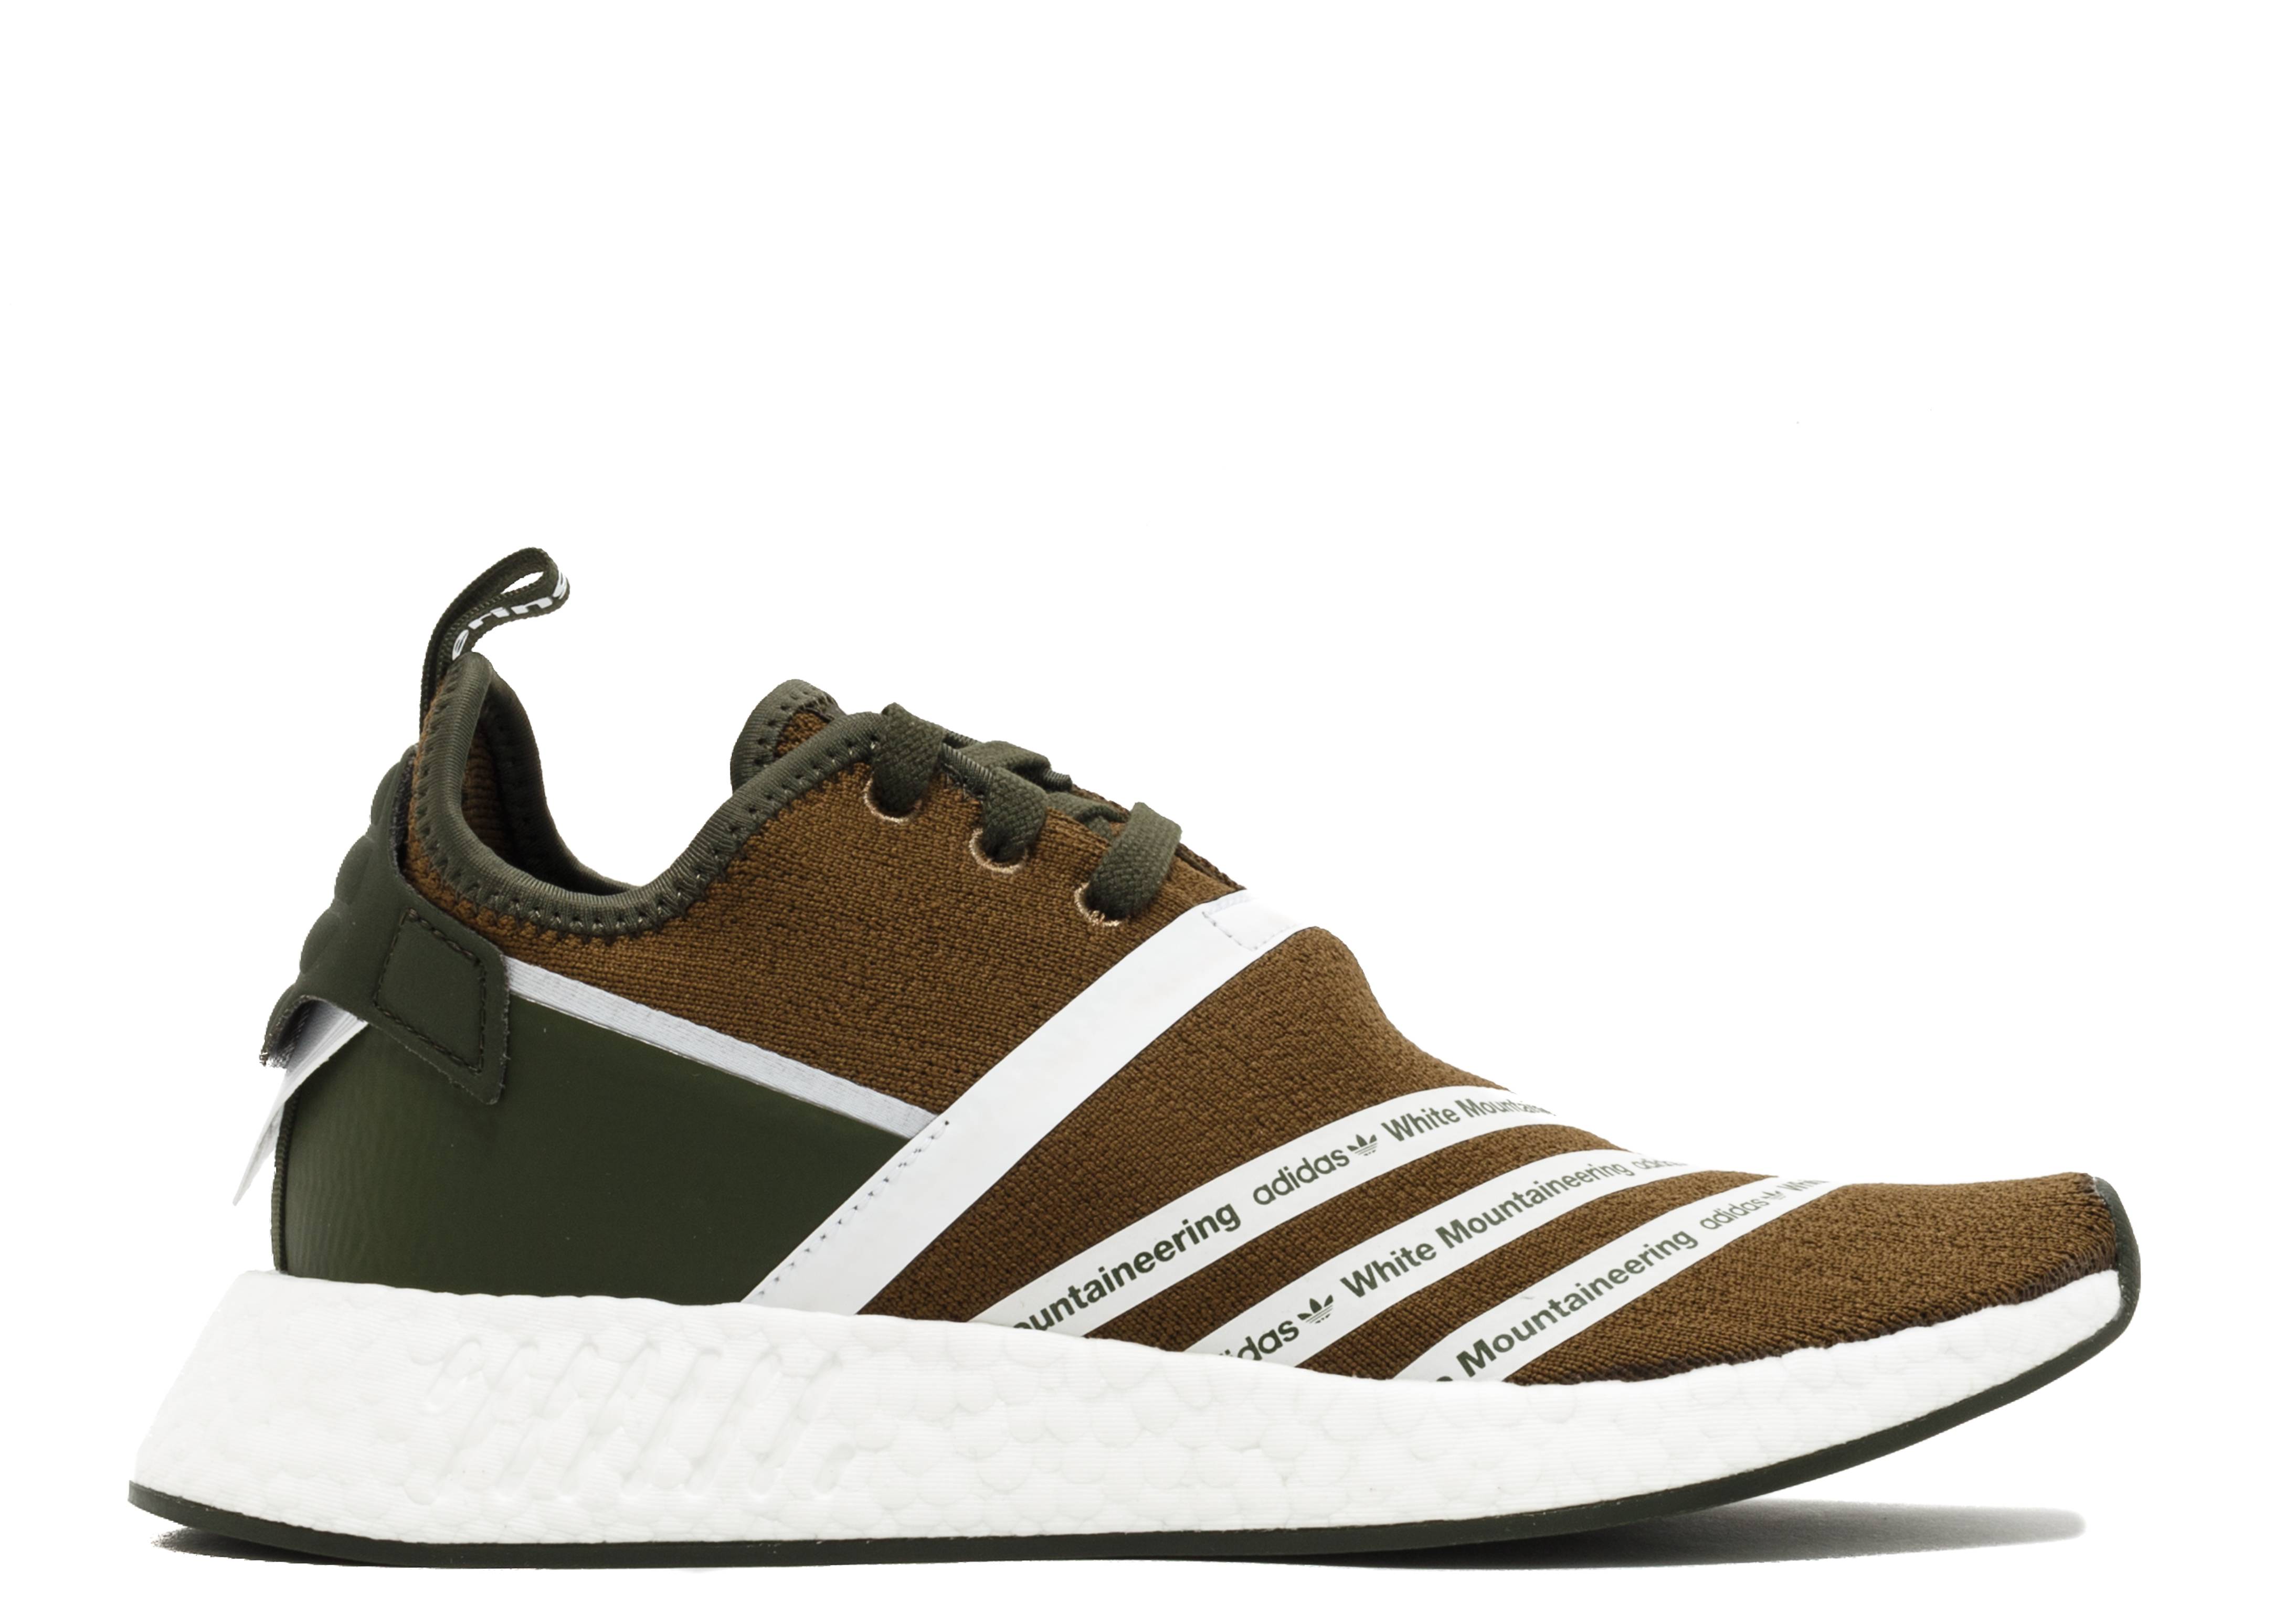 White Mountaineering x NMD_R2 Primeknit 'Olive'